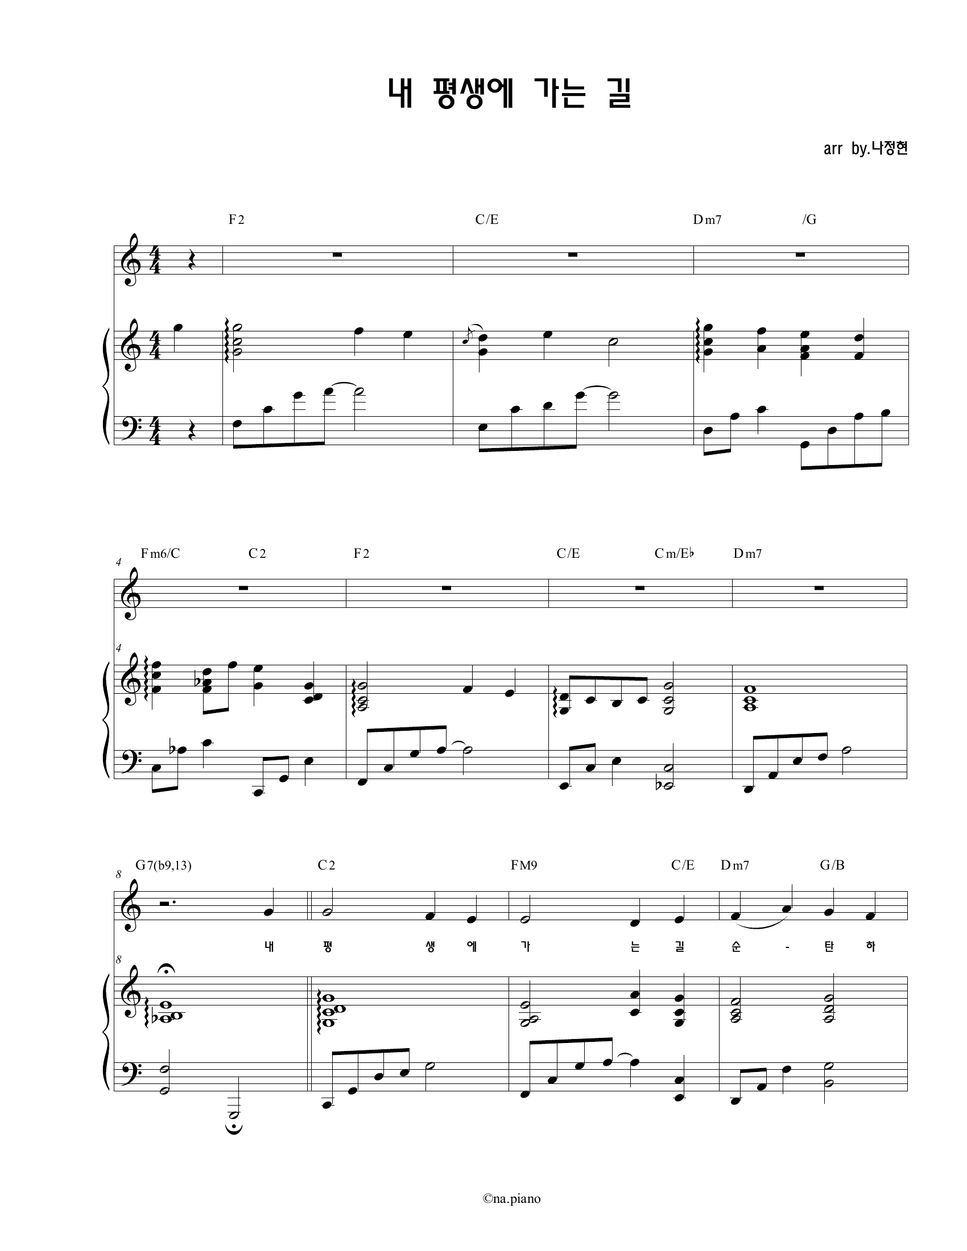 hymn-it-is-well-with-my-soul-sheets-by-na-piano